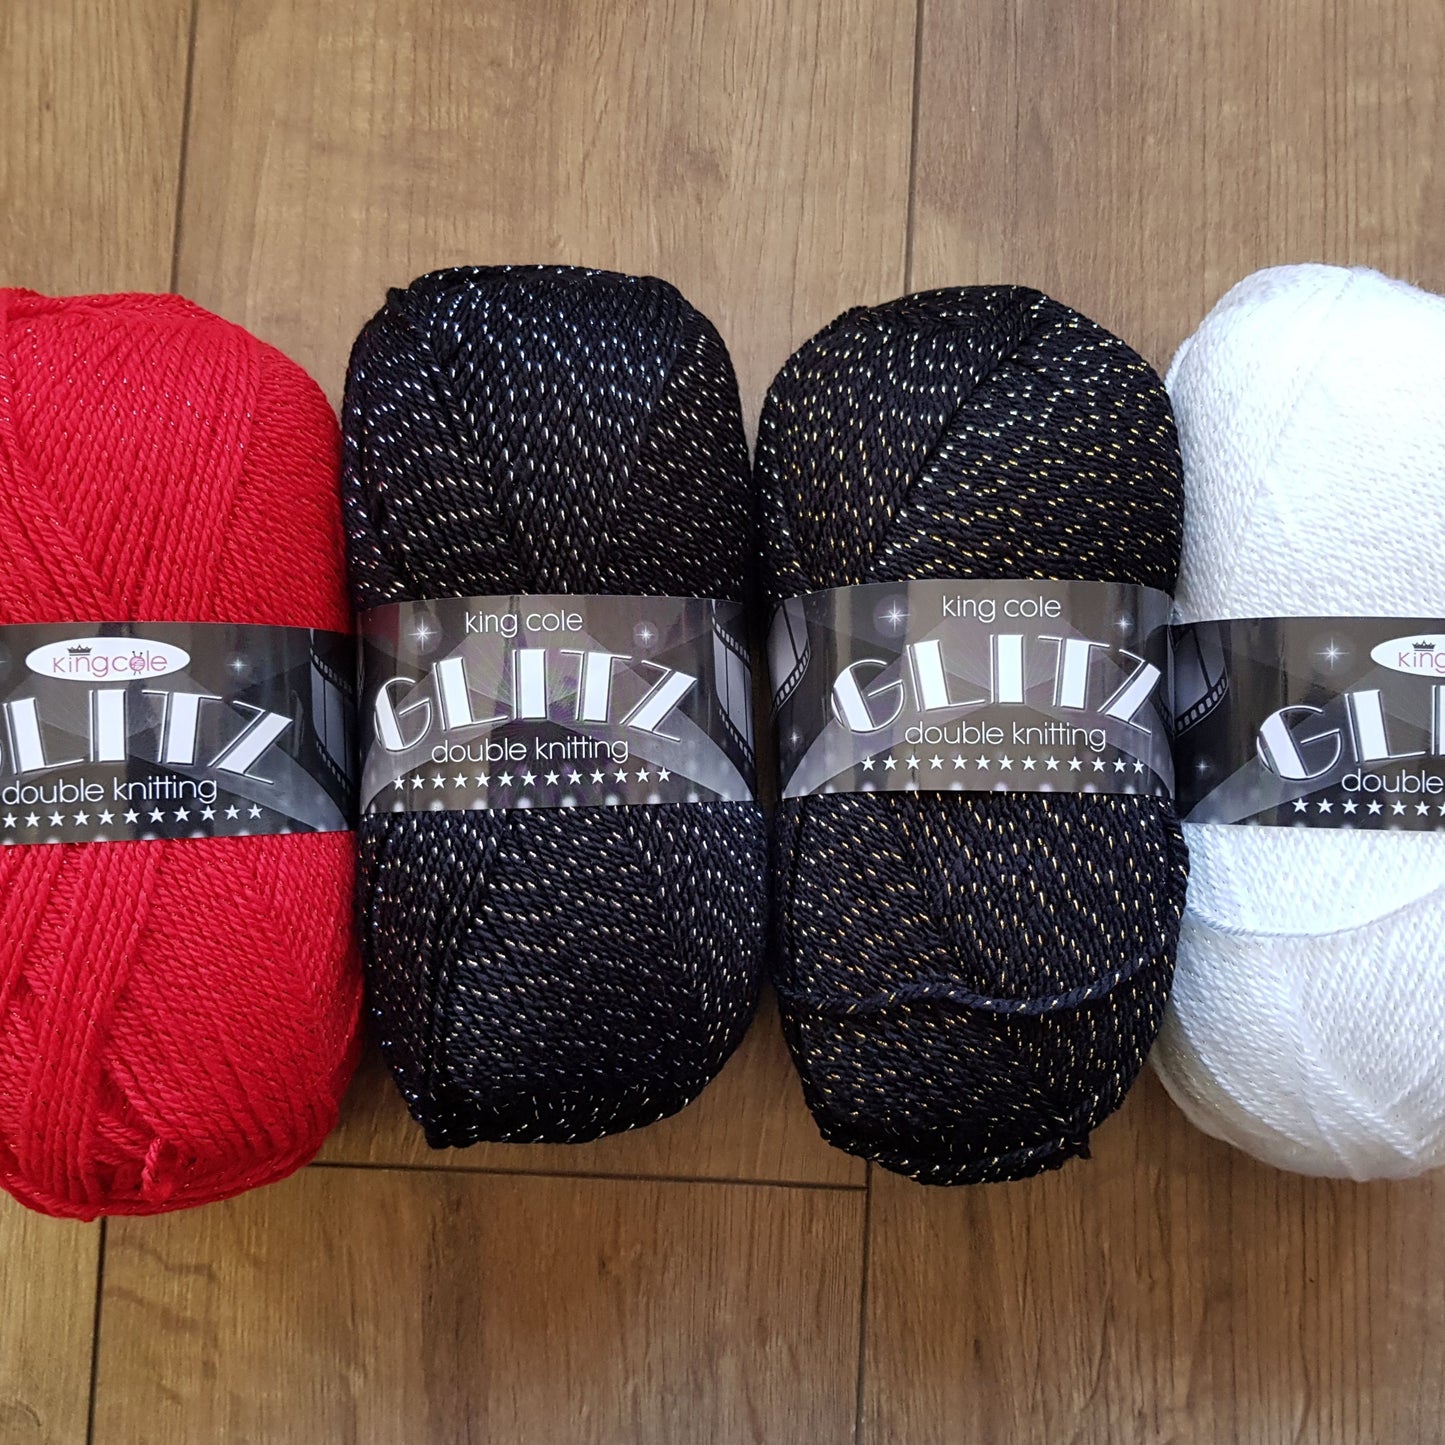 King Cole Glitz Double Knitting Wool 100g - Various Shades